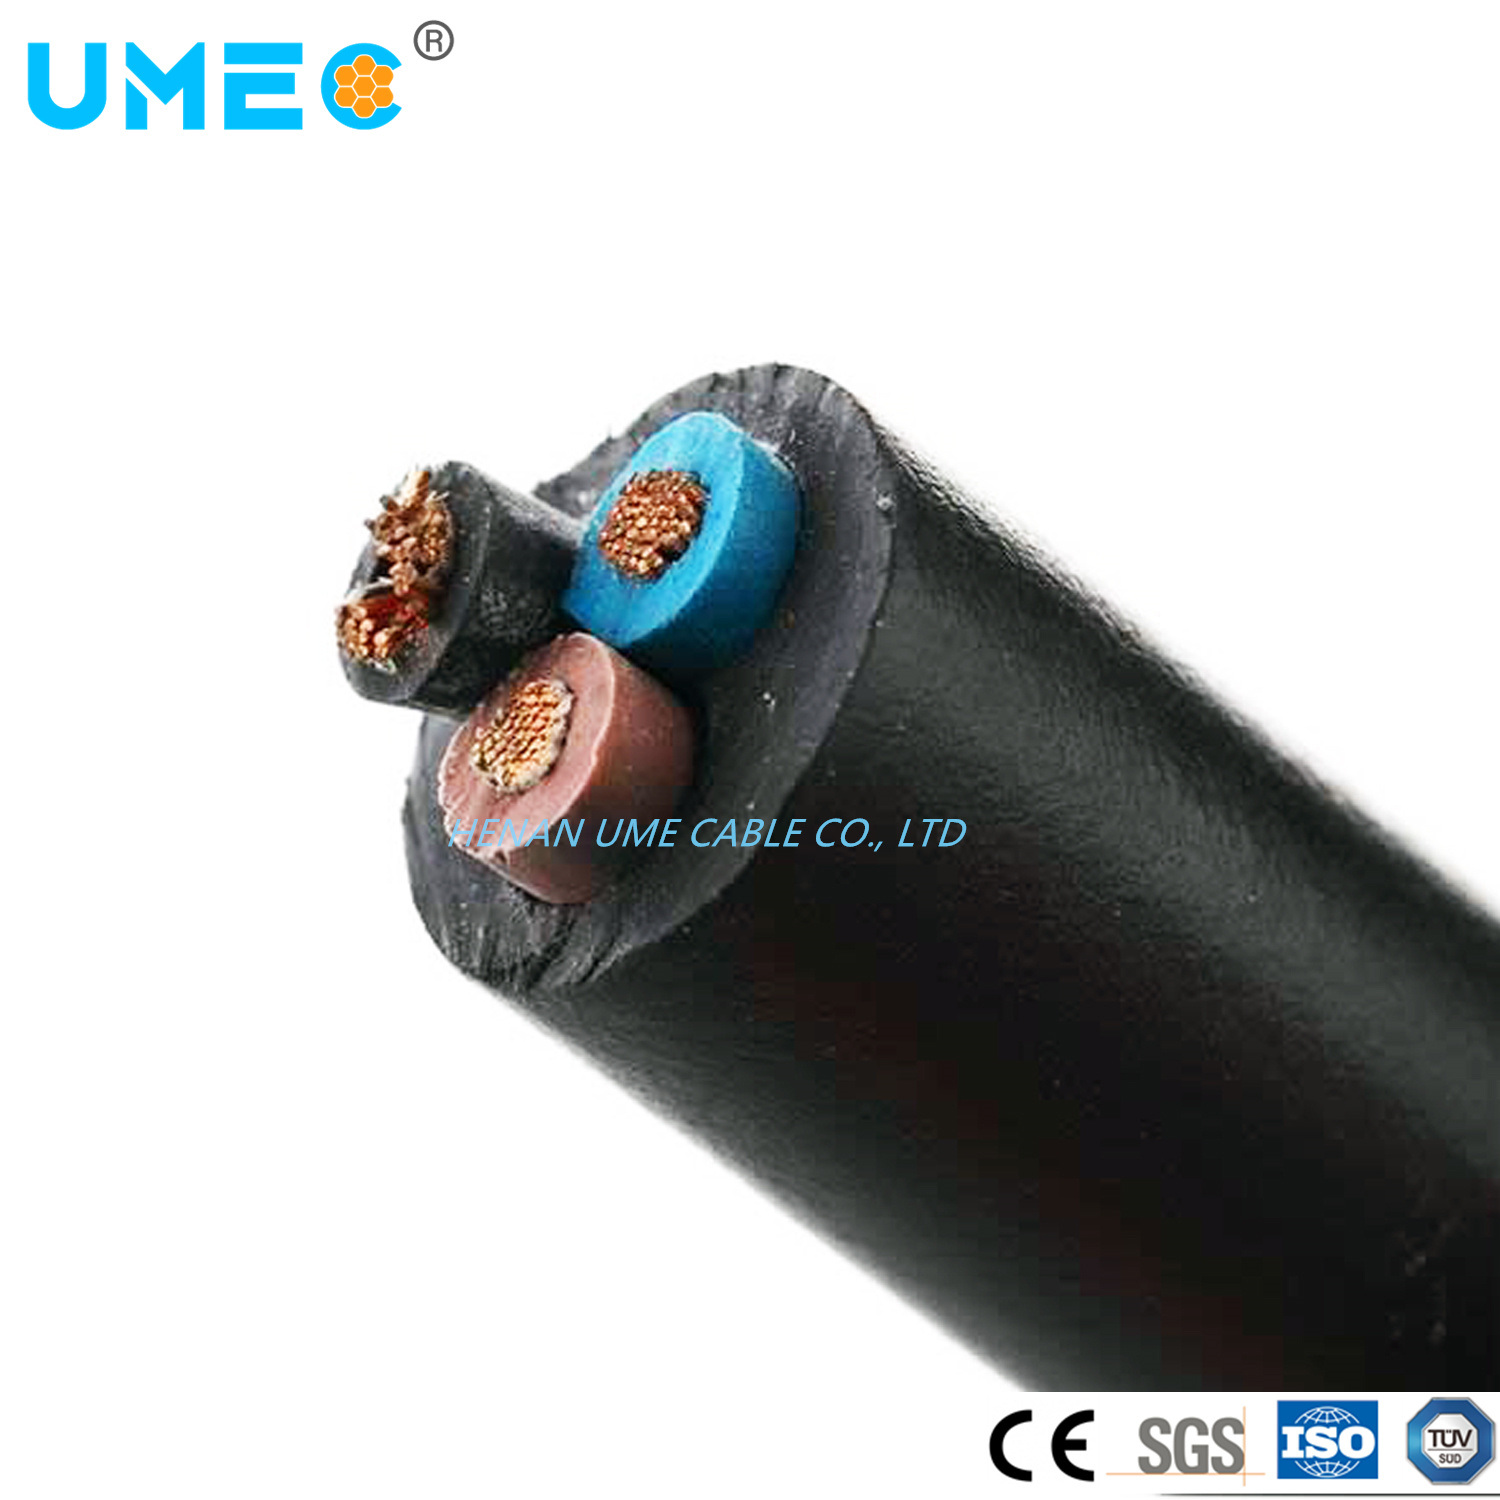 Electrical Heavy Standard Construction Oil-Resistant H05rn-F H07rn-F Power Control Electric Cable